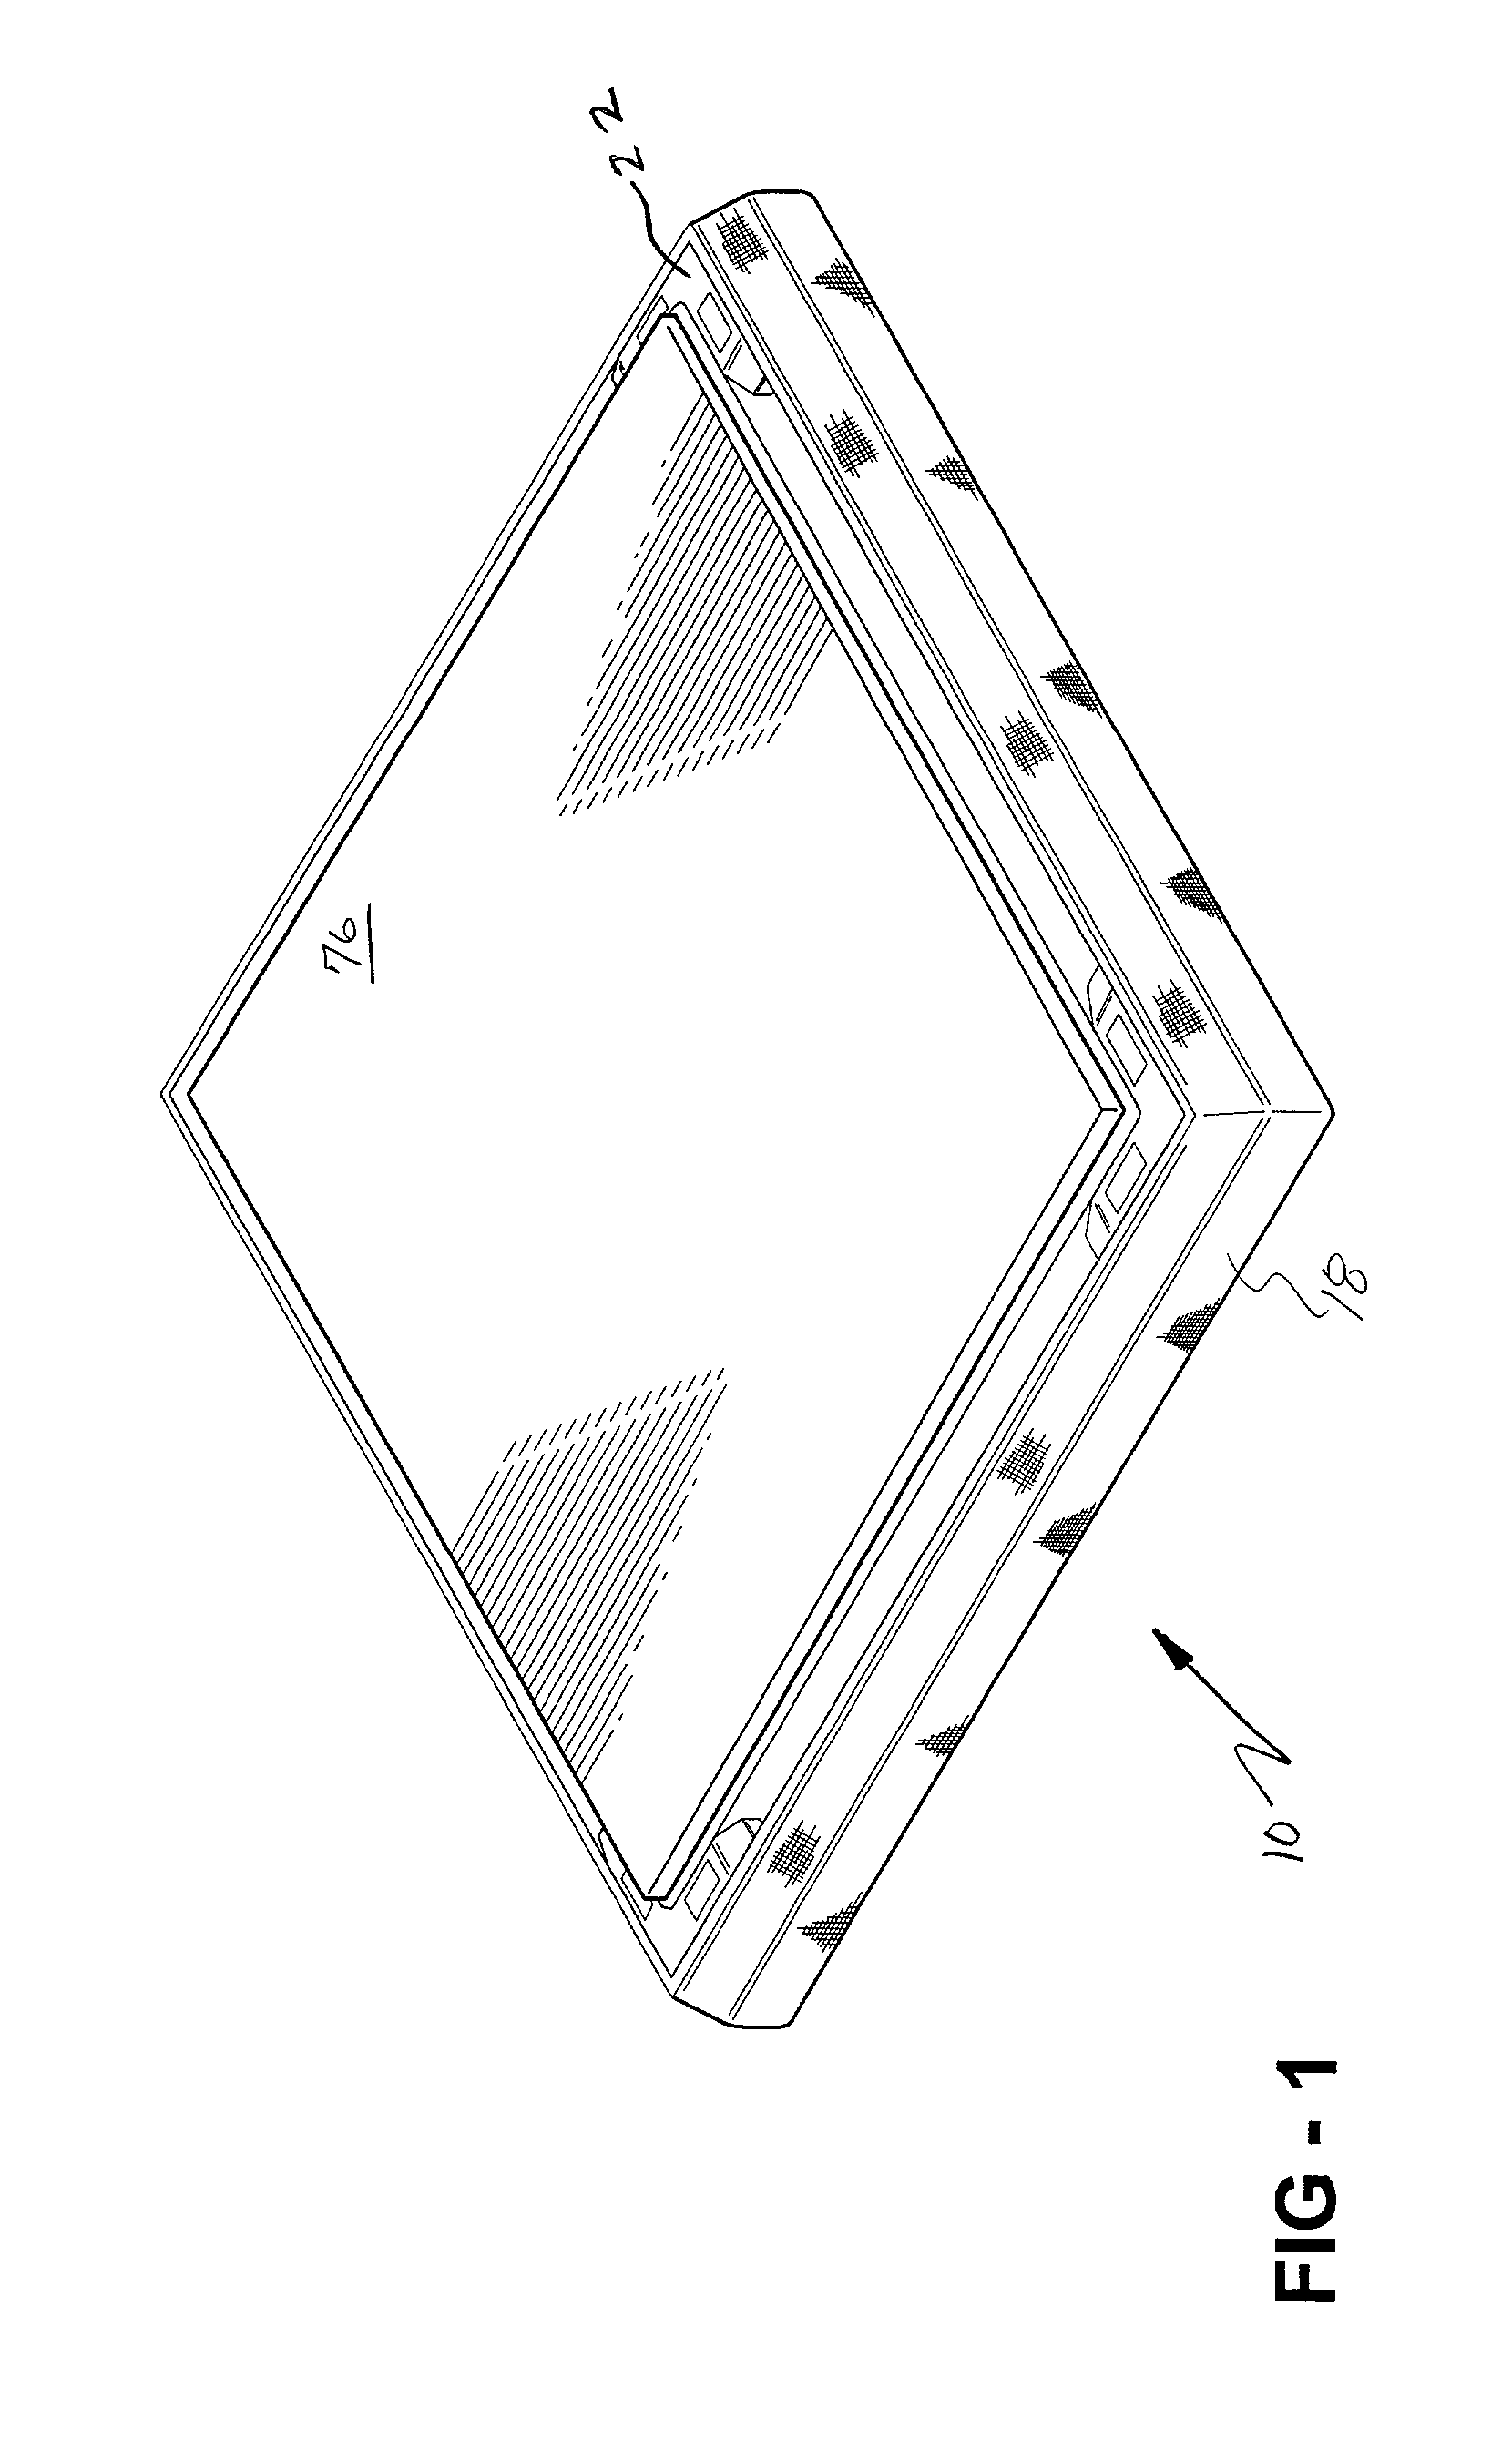 Frame assembly and frame component for tensioning fabric about a panel of a partition system